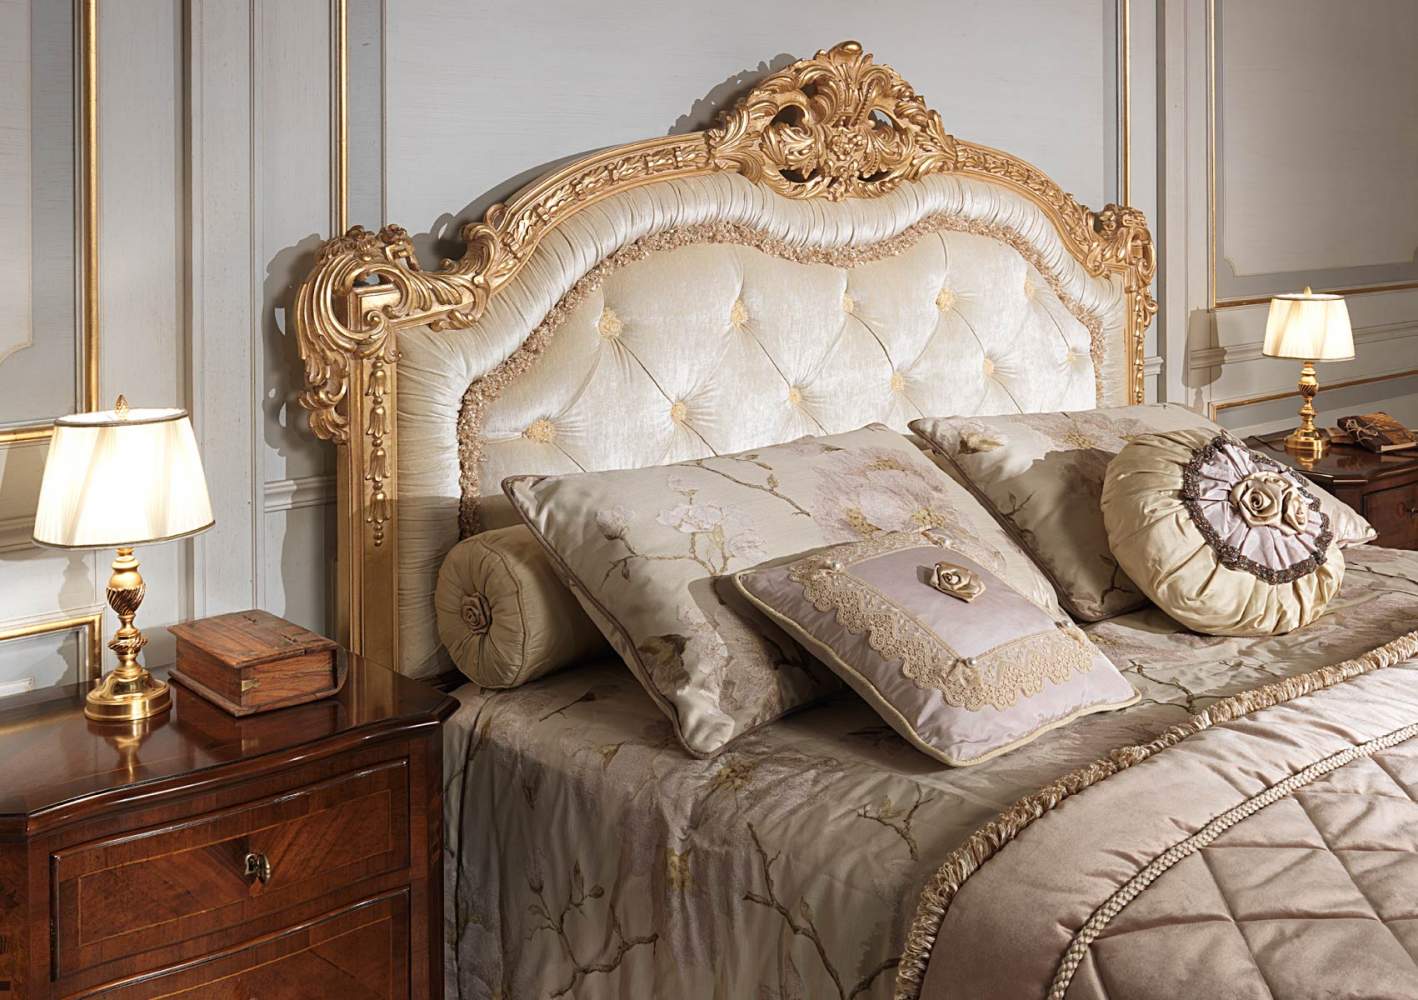 Classic 19th century french bedroom, capitonnè bed with golden carvings